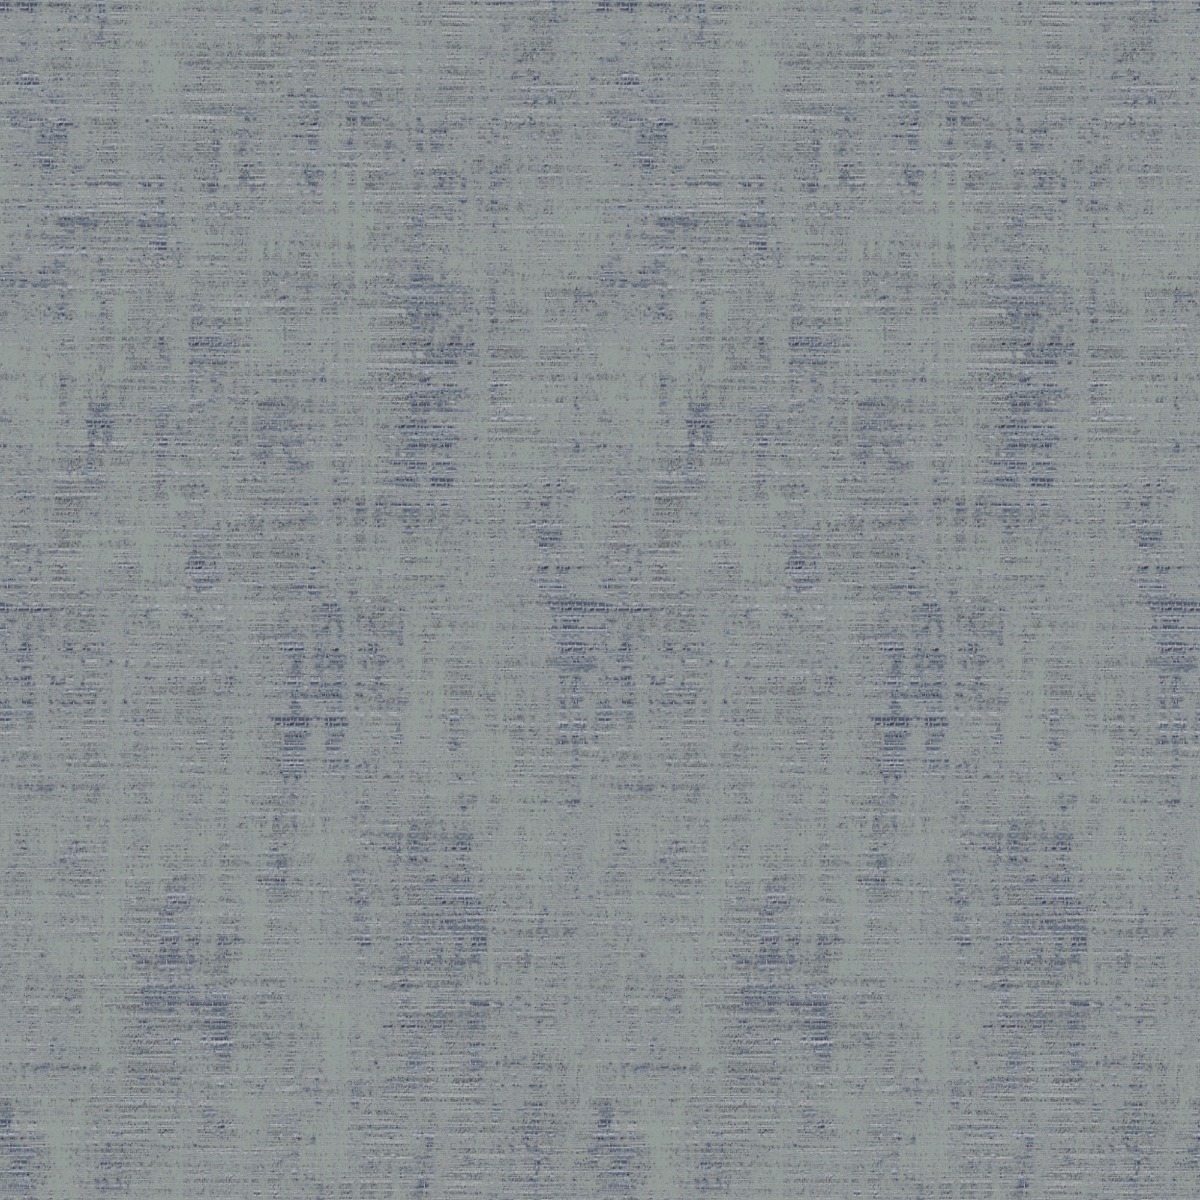 A seamless fabric texture with graphical blue texture units arranged in a None pattern